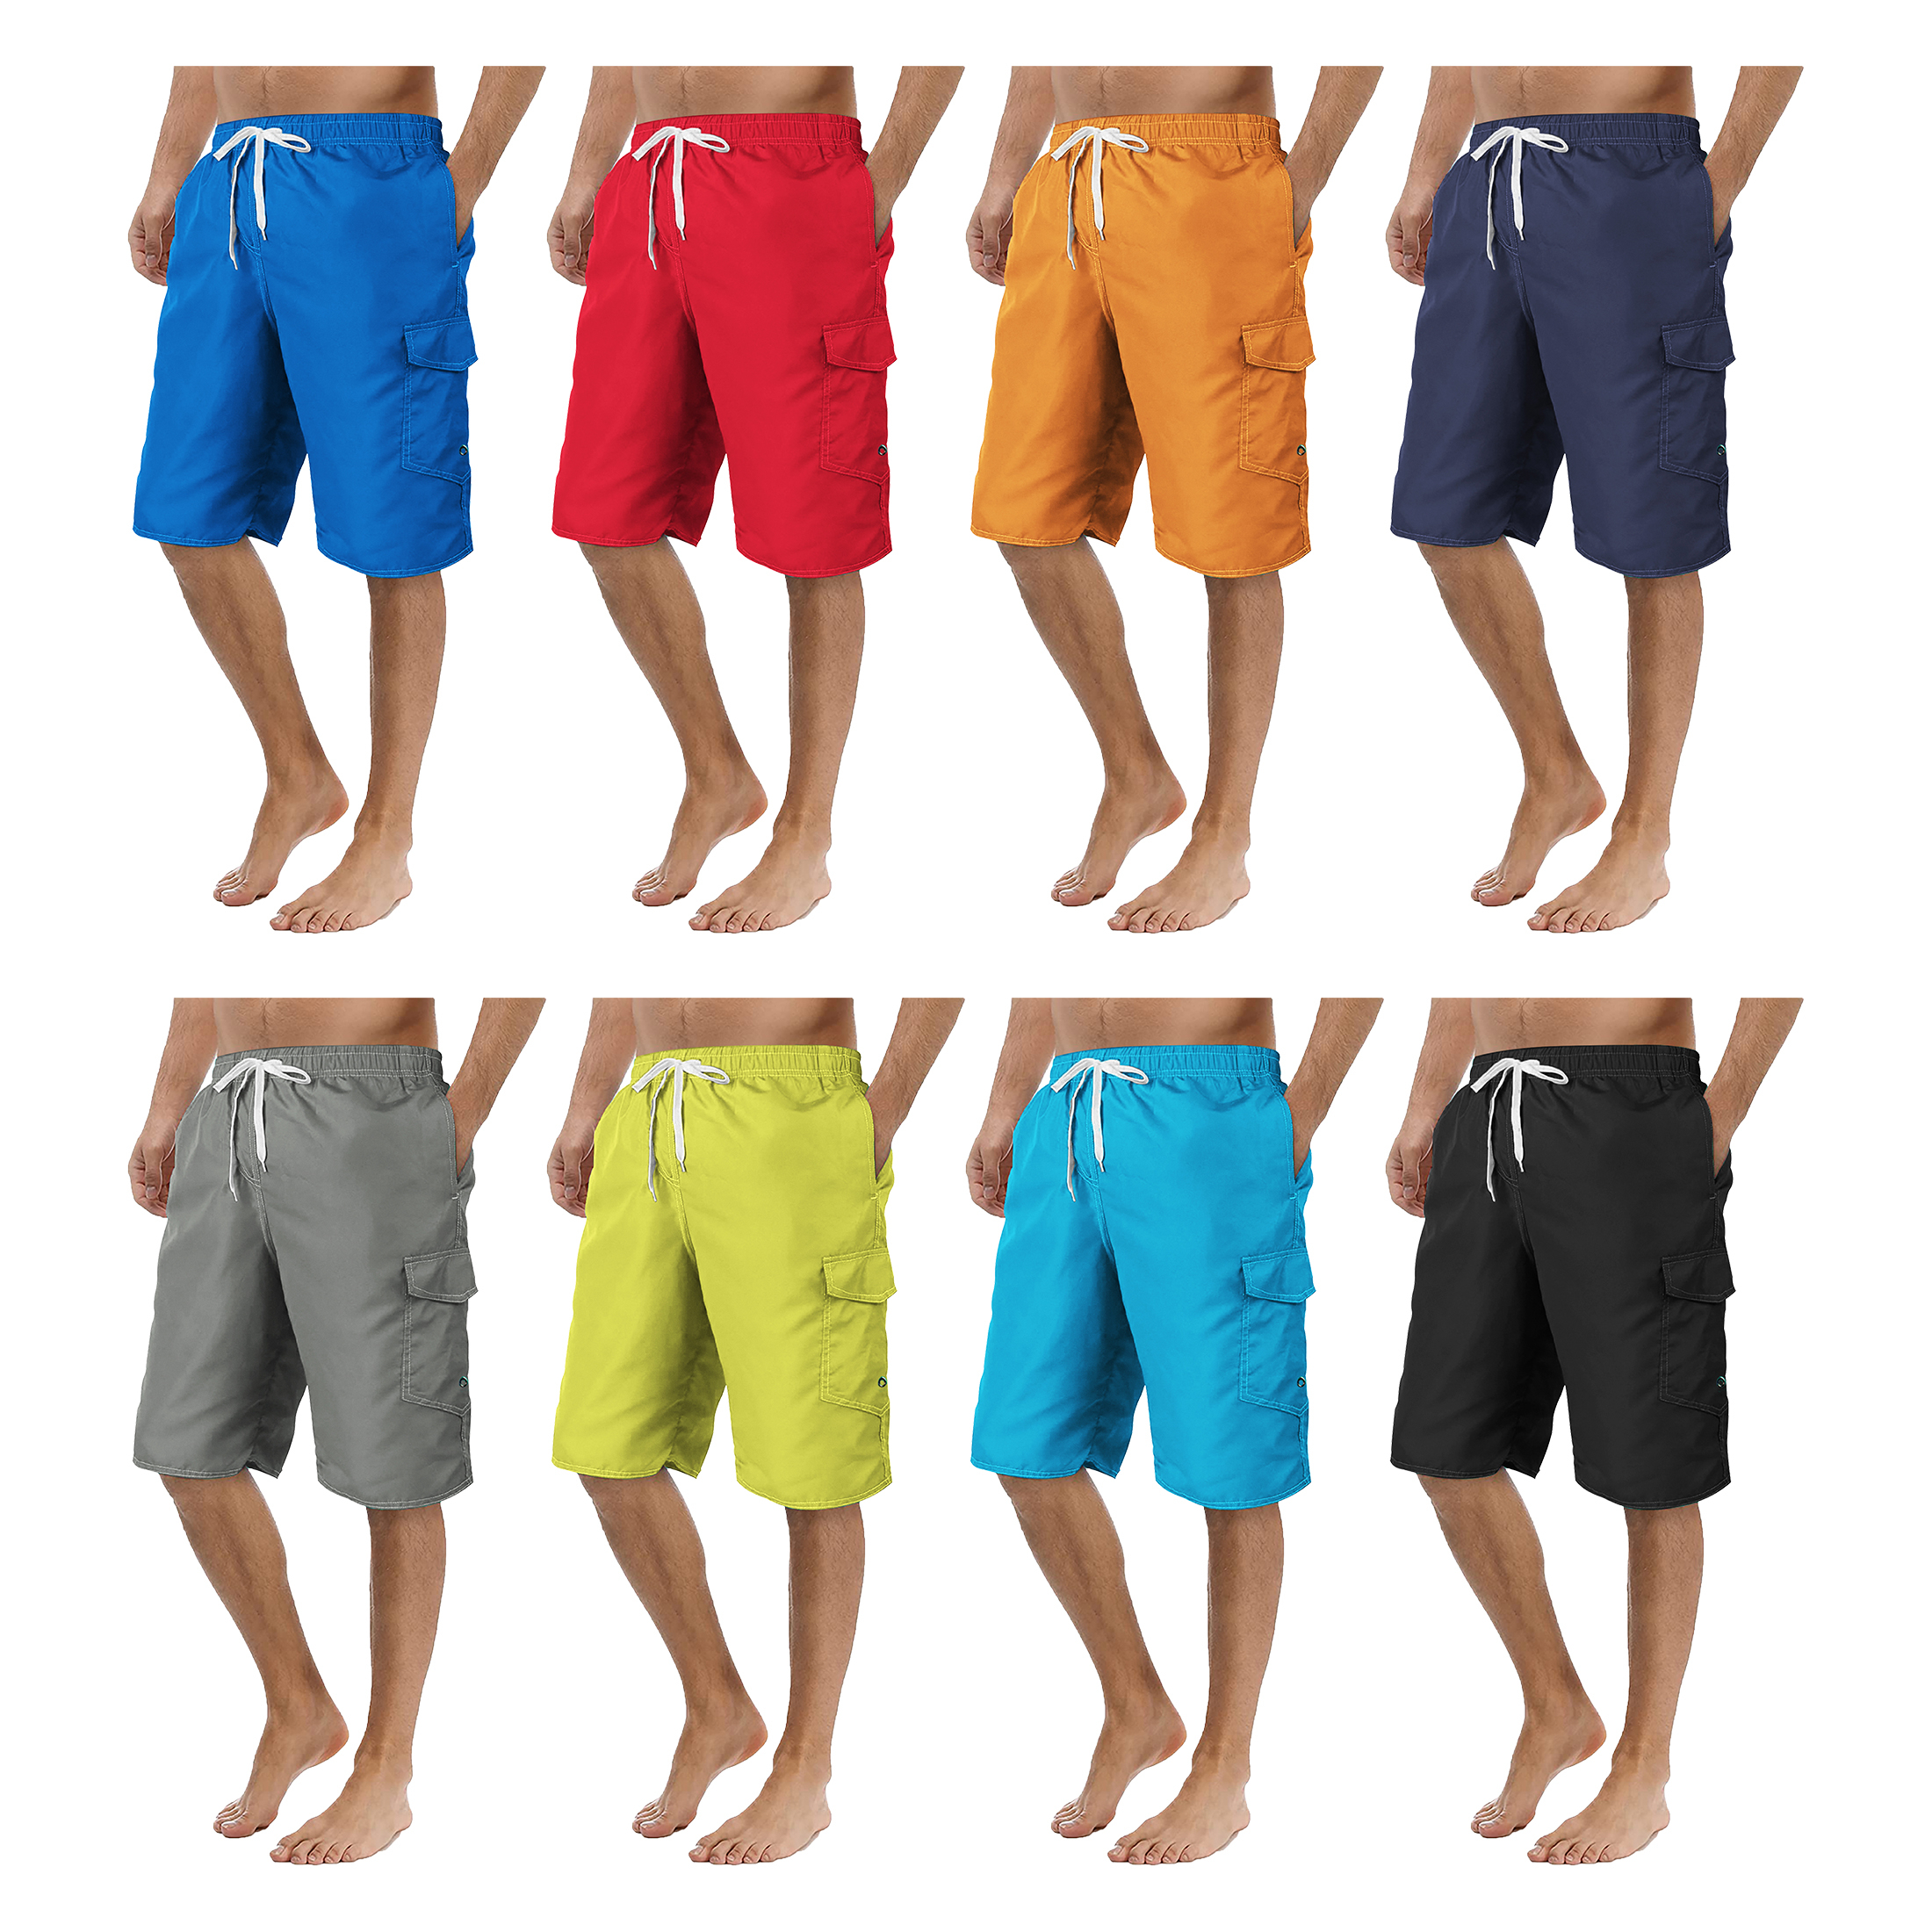 3-Pack Men's Swim Cargo Shorts With Pockets Drawstring Beach Board Shorts Solid Bathing Trunks Cropped Trouser Pants Summer Suit Multi Color